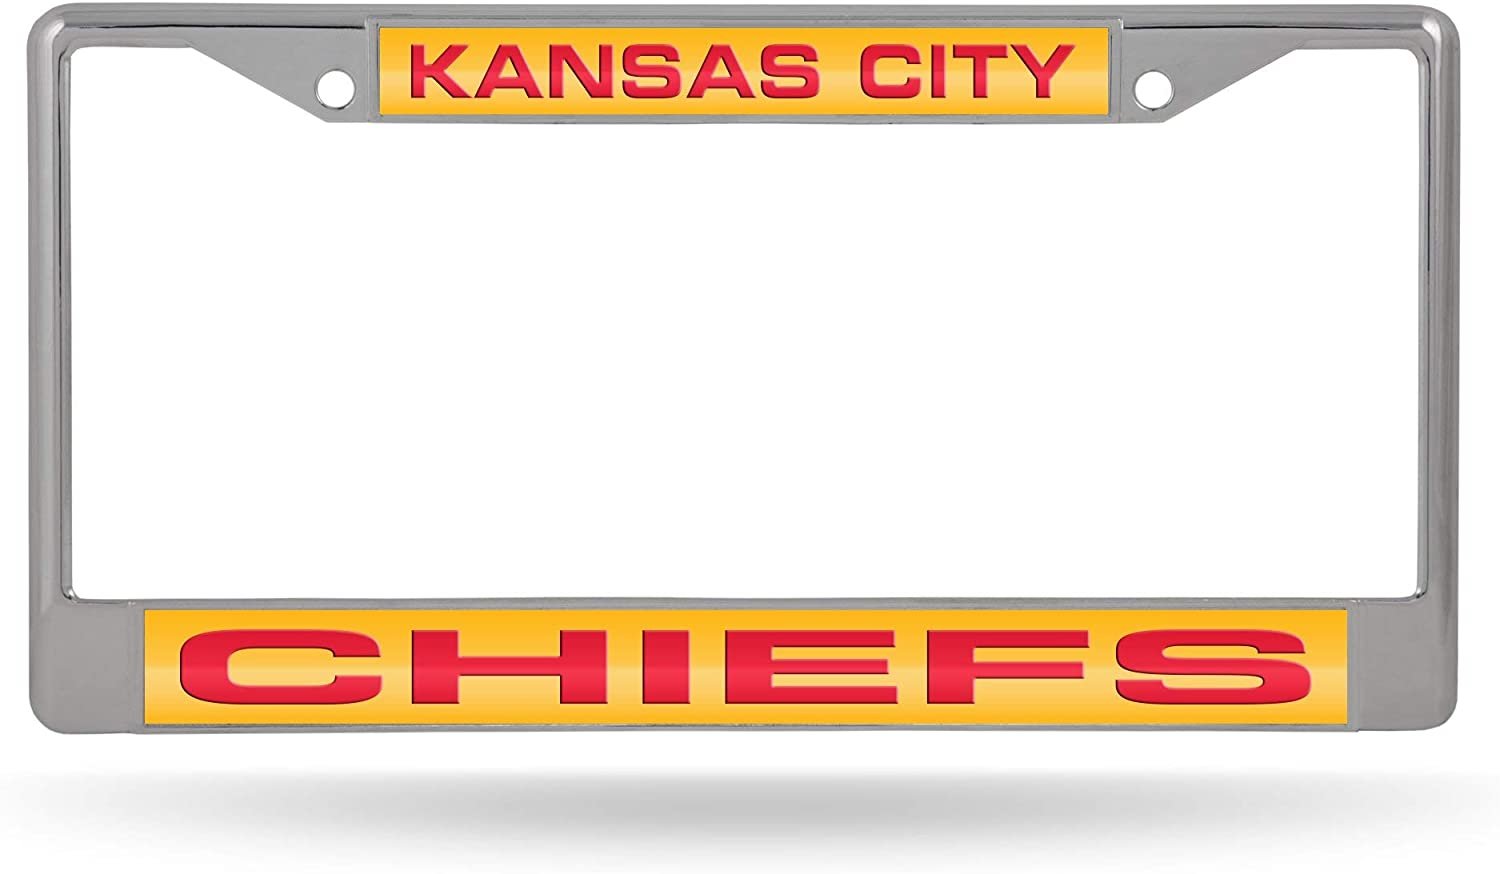 Kansas City Chiefs Chrome Metal License Plate Frame Tag Cover, Laser Mirrored Inserts, 12x6 Inch